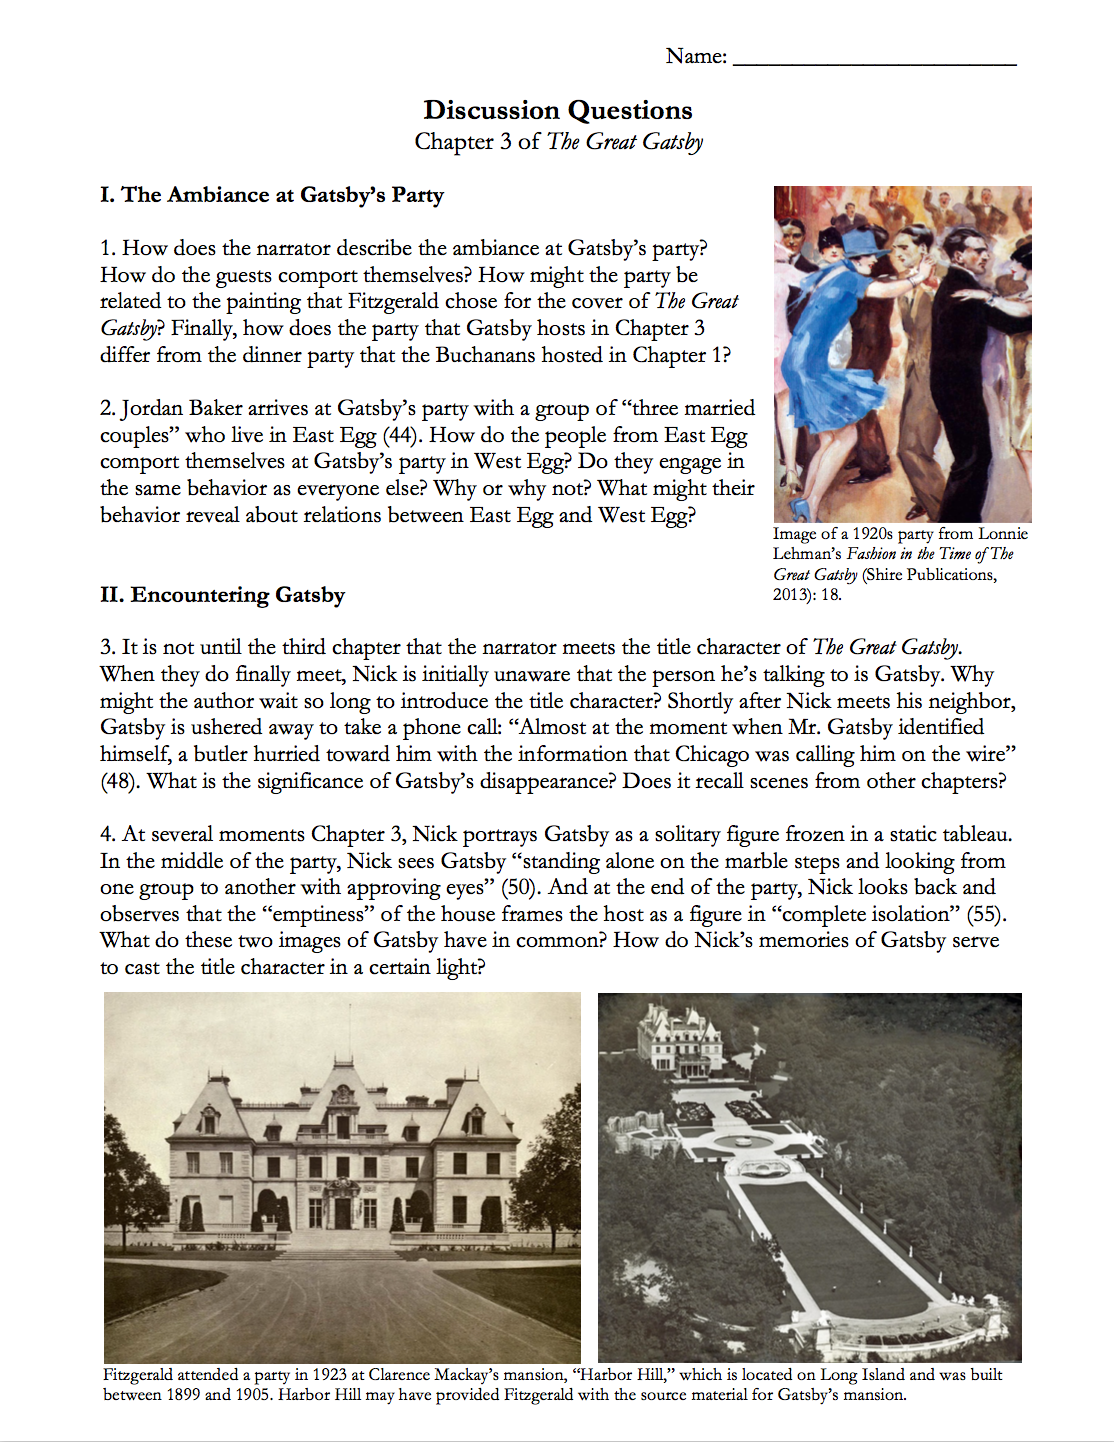 The Great Gatsby by F. Scott Fitzgerald | Complete Teaching Unit